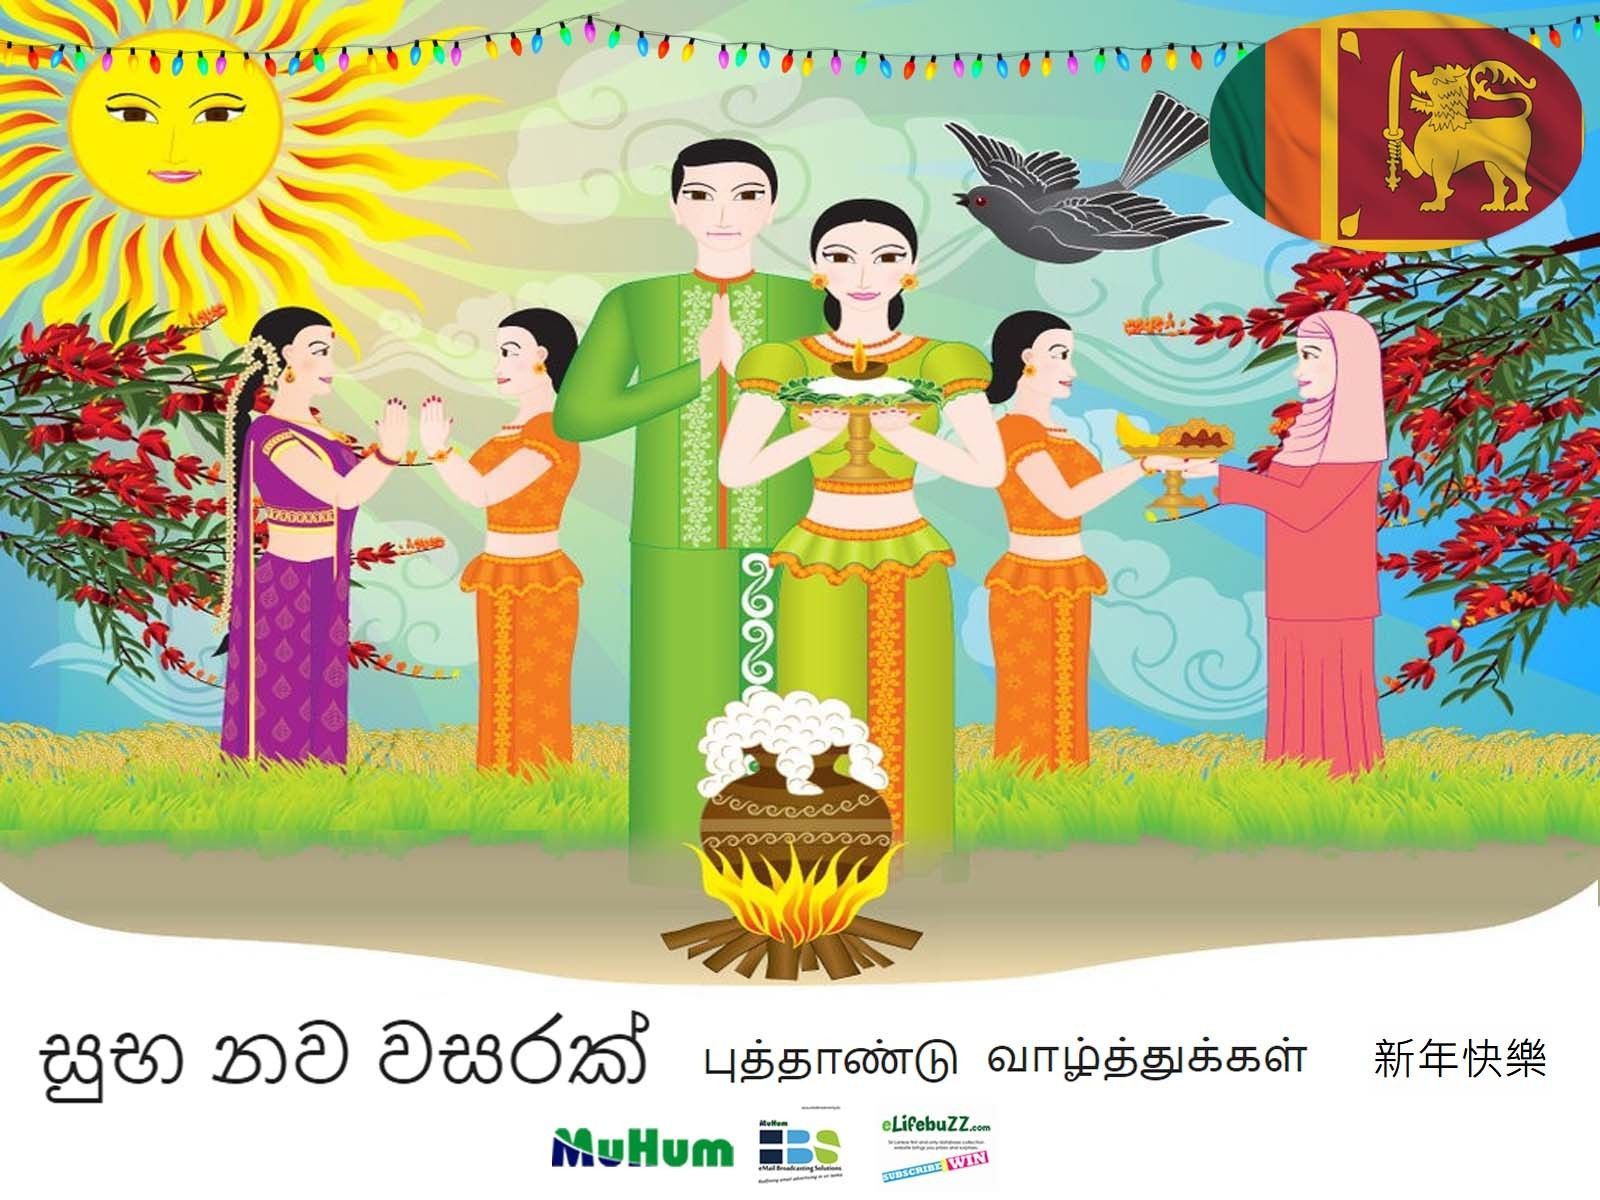 For the Sri Lankans around the world, we wish Happy New Year #SriLanka #Colombo #TeamEBS #eMail. Sinhala new year wishes, Sinhala tamil new year, New year wishes